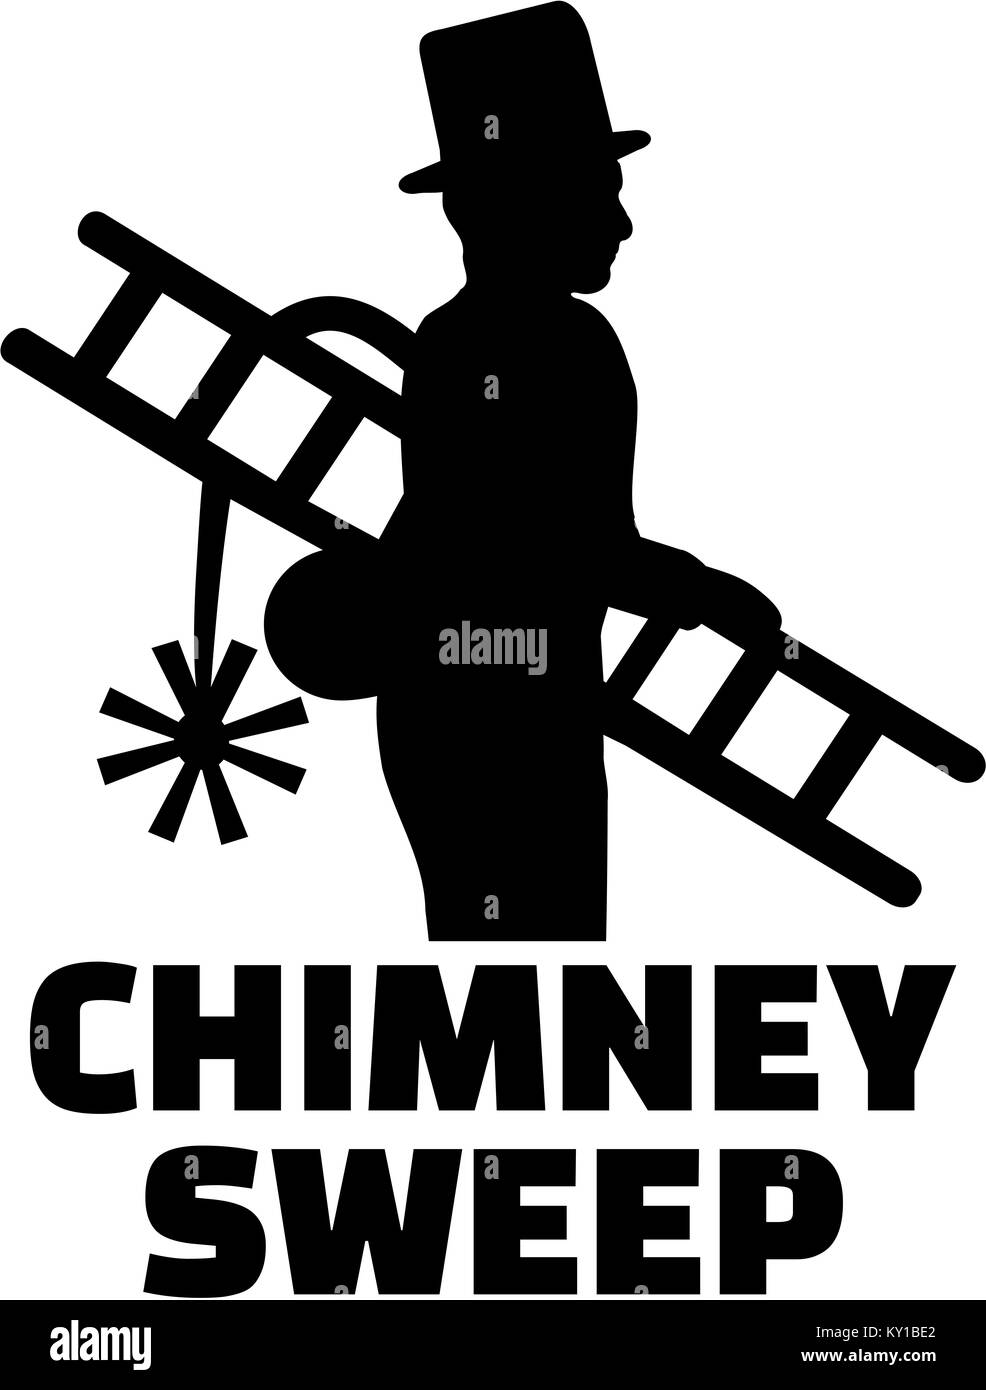 Chimney sweep silhouette with job title Stock Photo